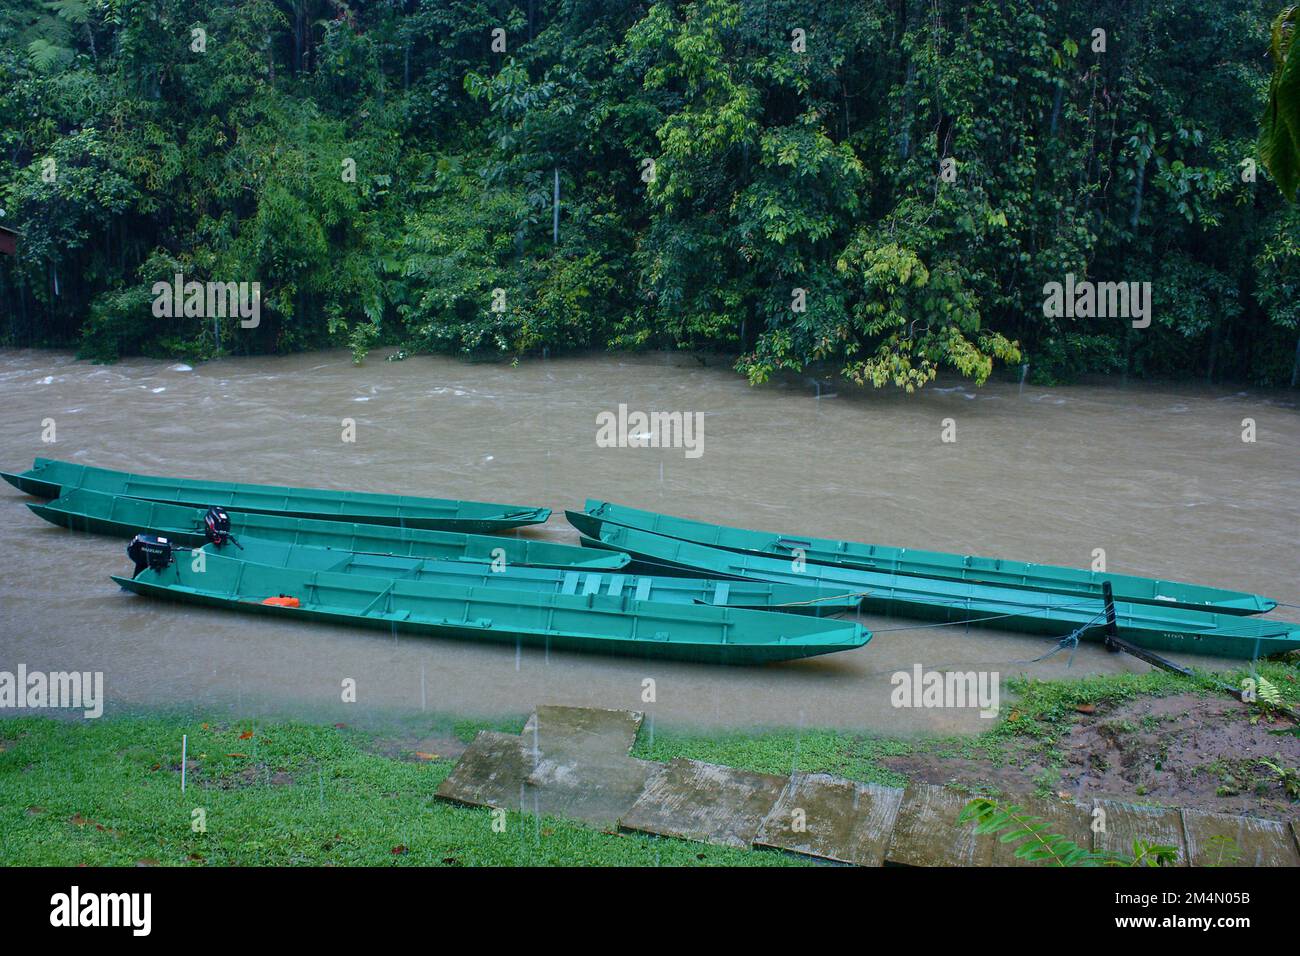 Three Longboats on the flooded river in a tropical forest, Brunei, Borneo Stock Photo